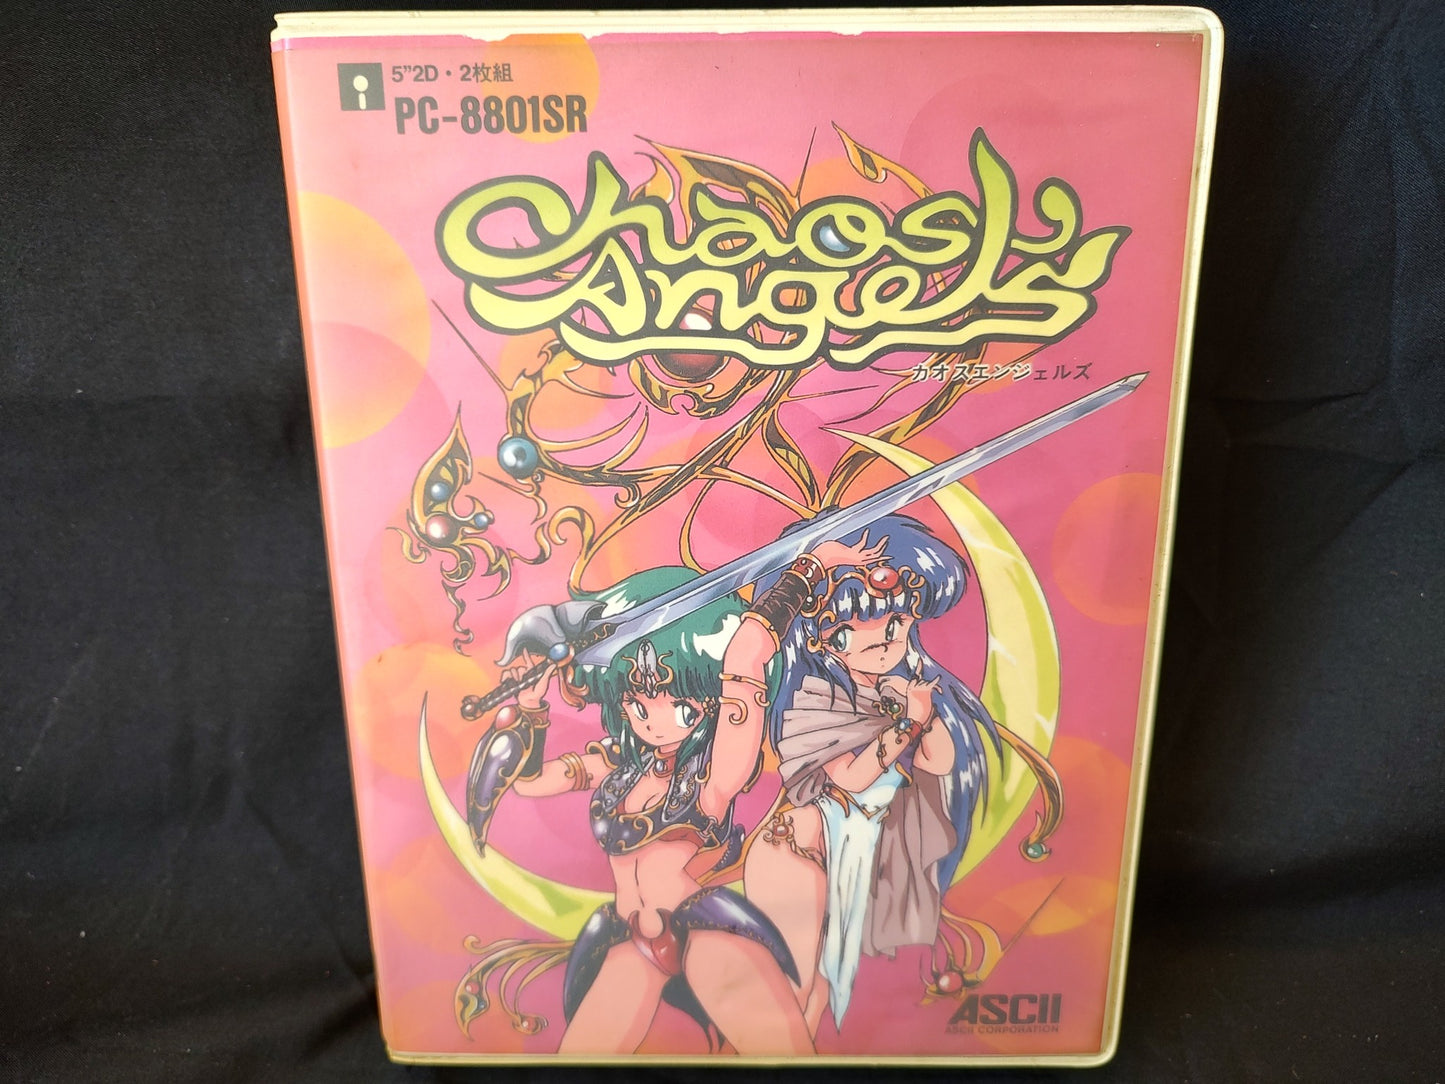 PC-8801 CHAOS ANGELS PC88 Game w/Manual, Papers, Box set, Not tested-g0208-